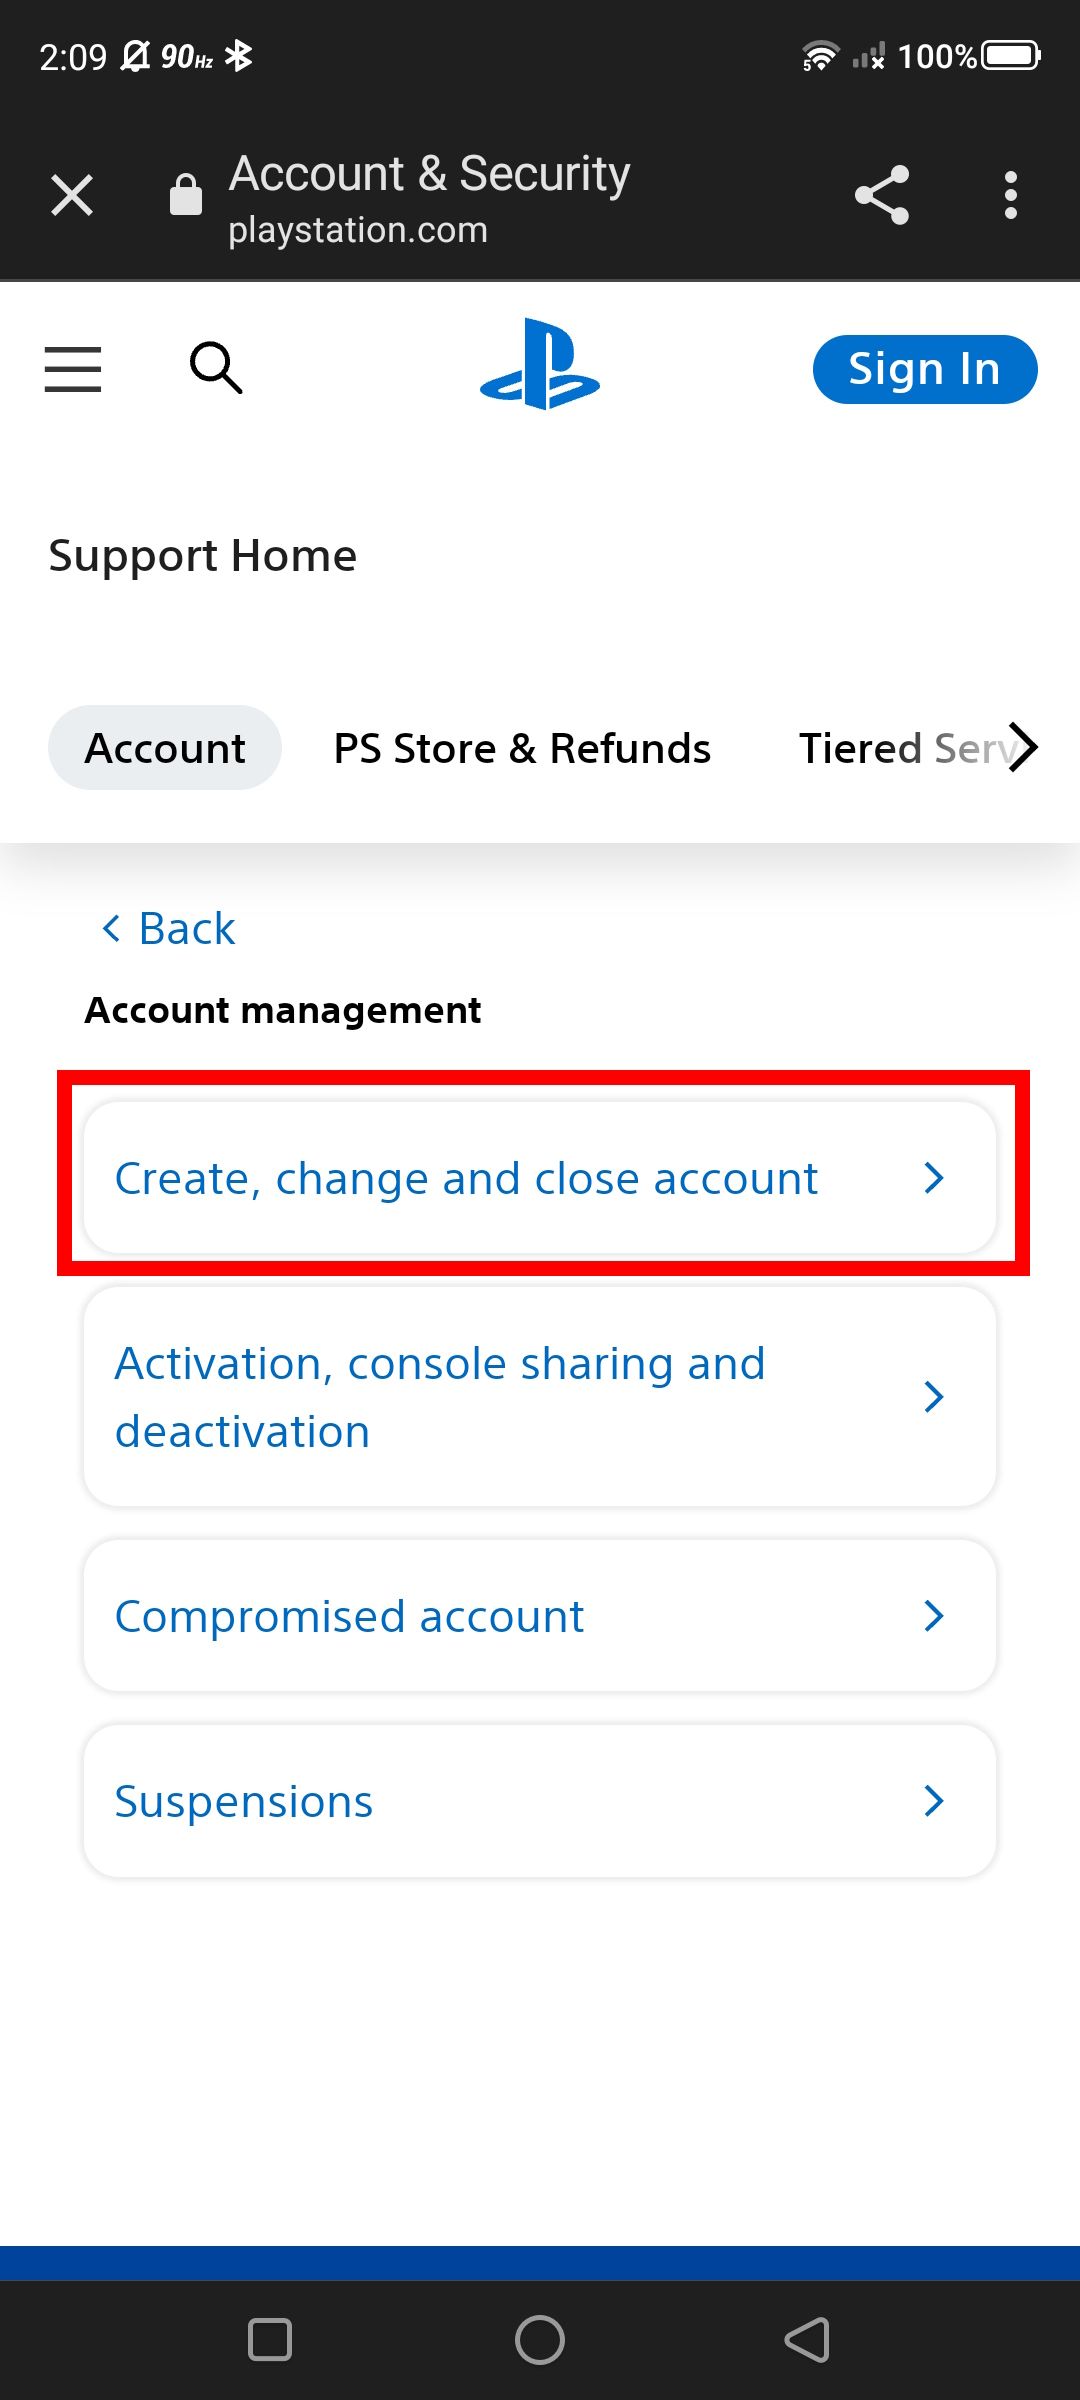 Red rectangle outline over Create, change and close account on the PlayStation Support page